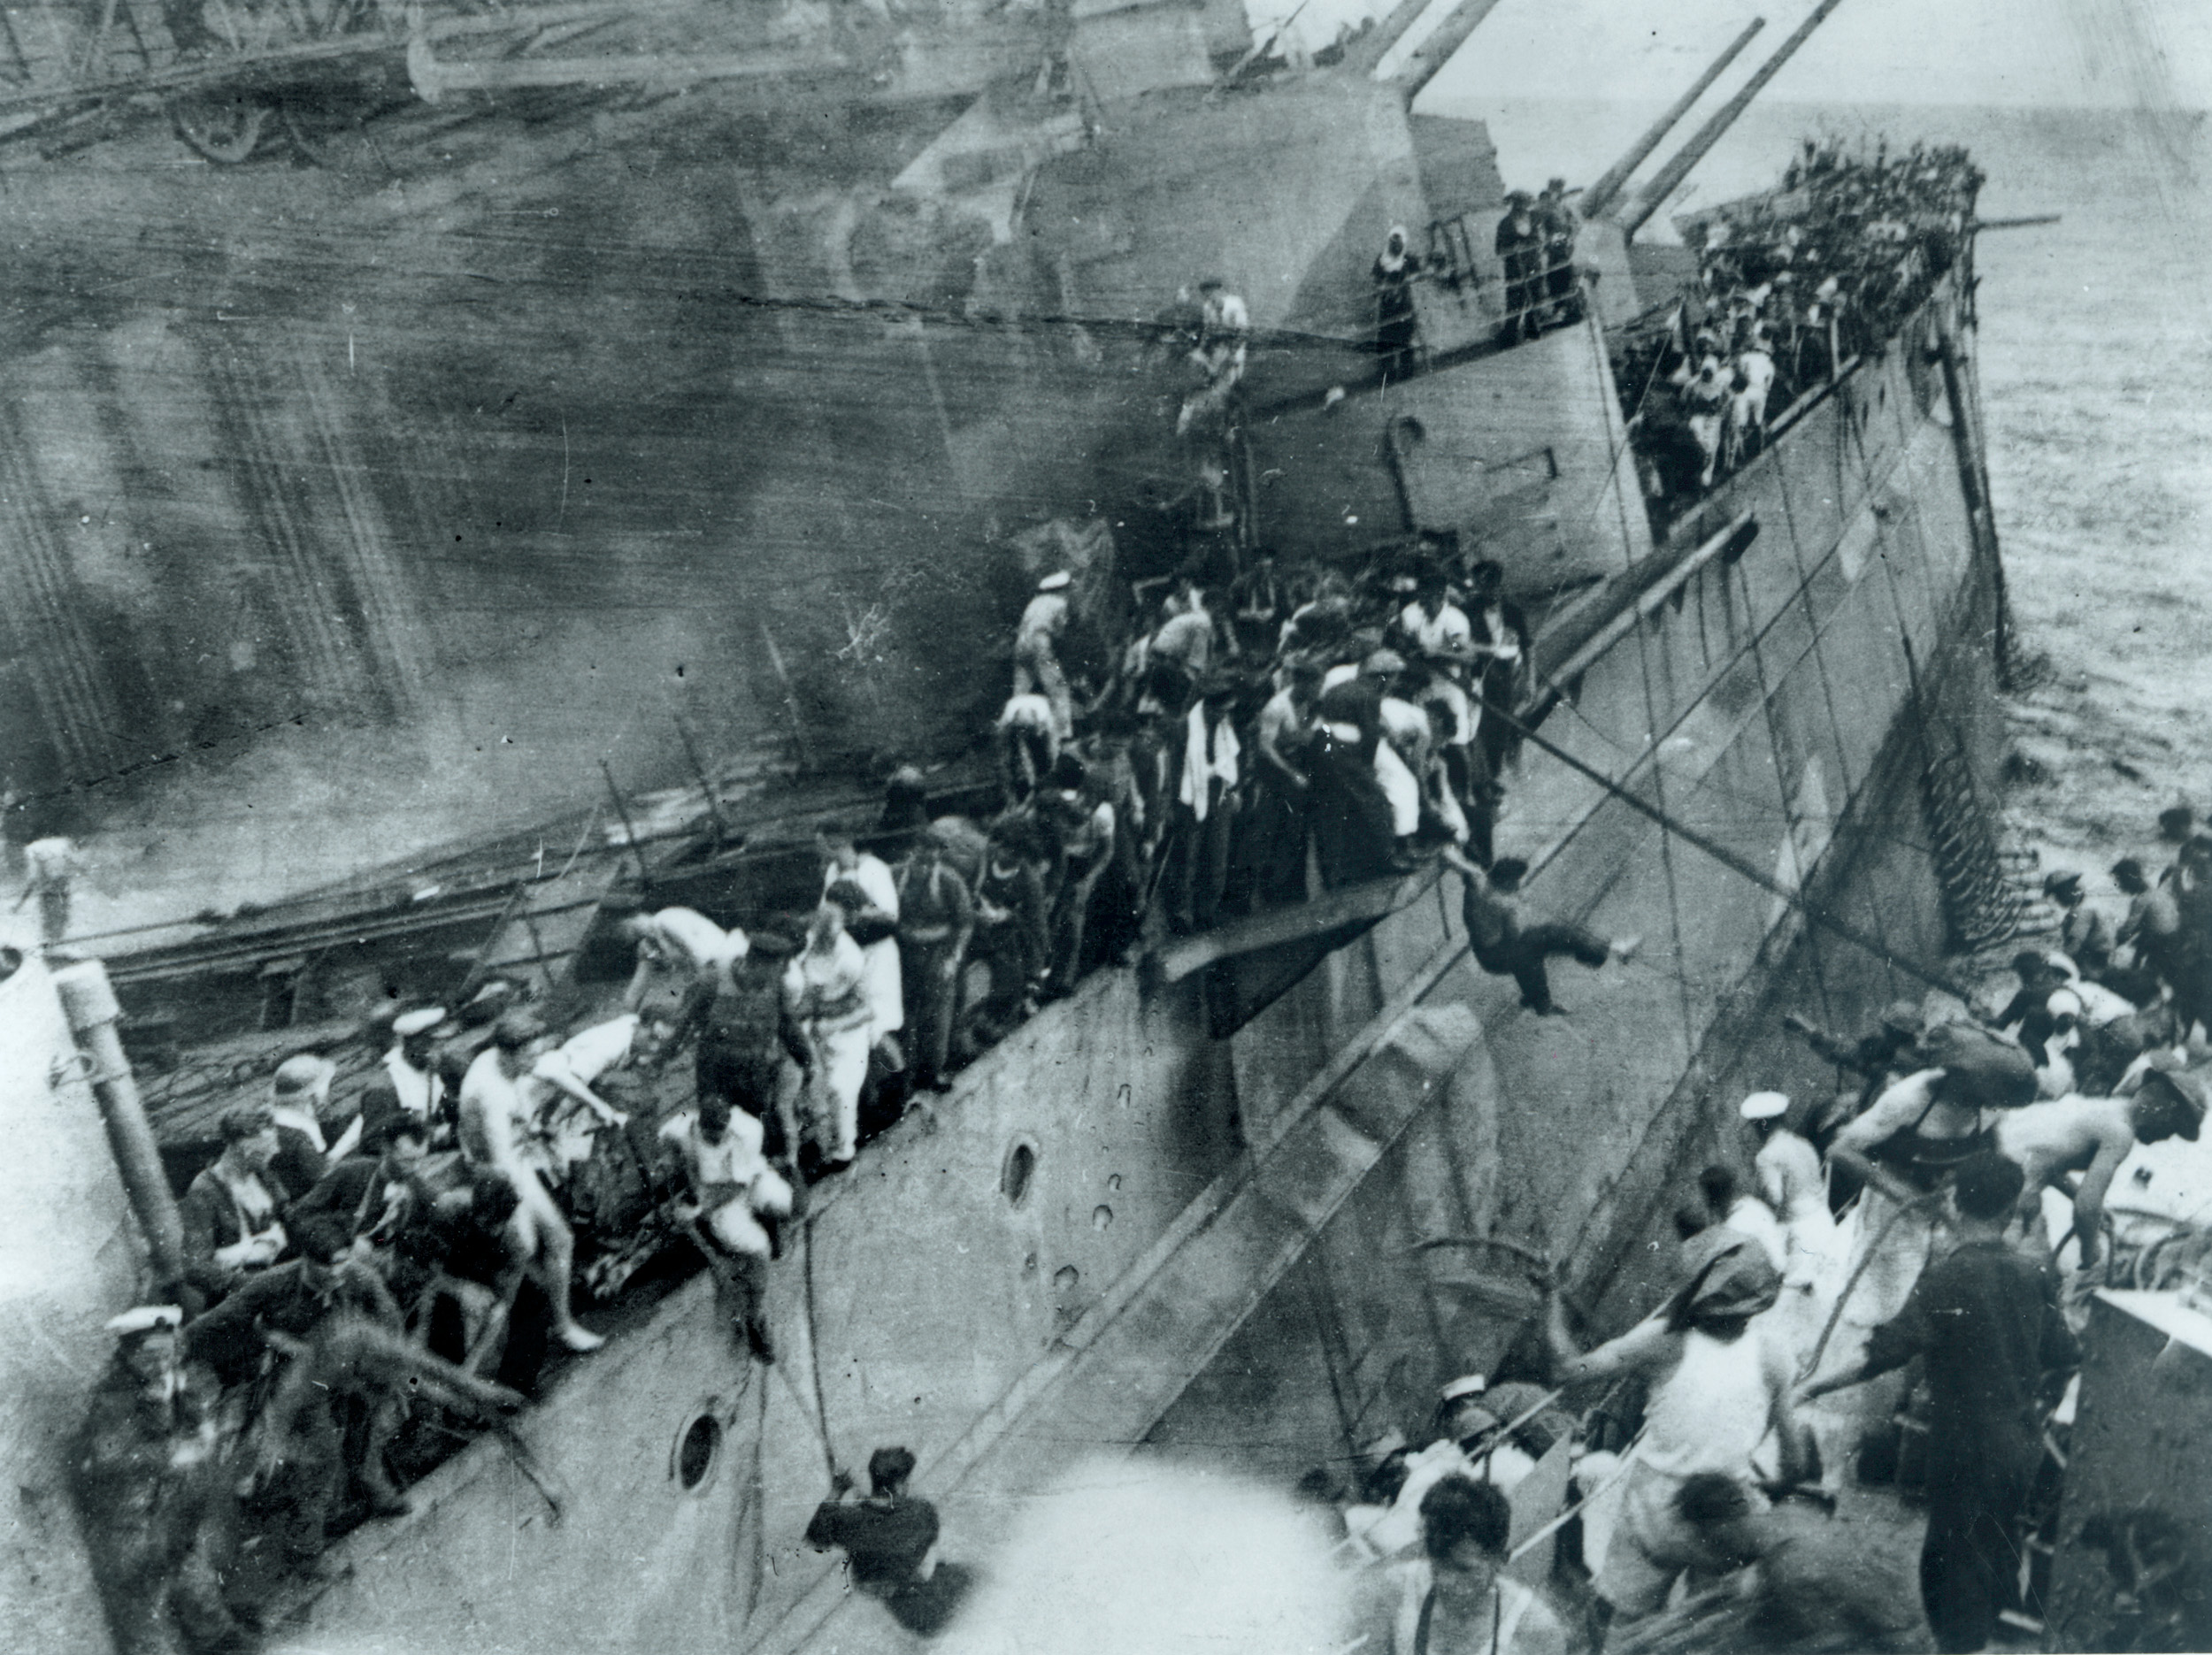 One of the crew of the destroyer Express took this photograph of crewmen of the Prince Of Wales scurrying to make the passage from the doomed ship to the valiant smaller vessel. The Express held close as long as she could. 